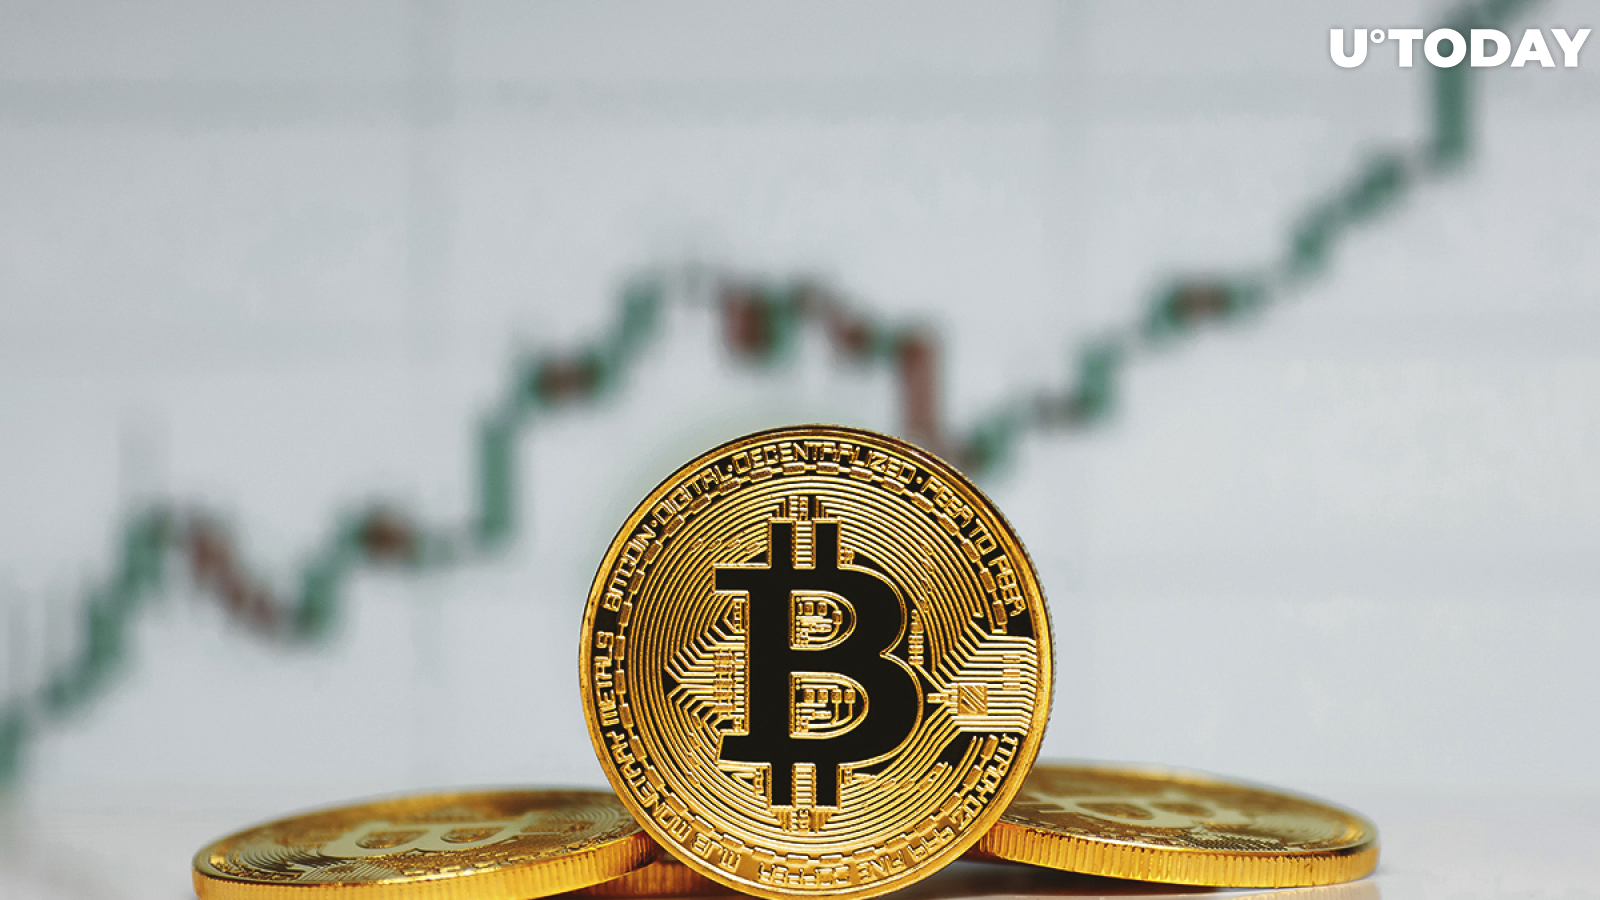 Bitcoin Price Goes on Double-Digit Growing Spree for Third Week in a Row